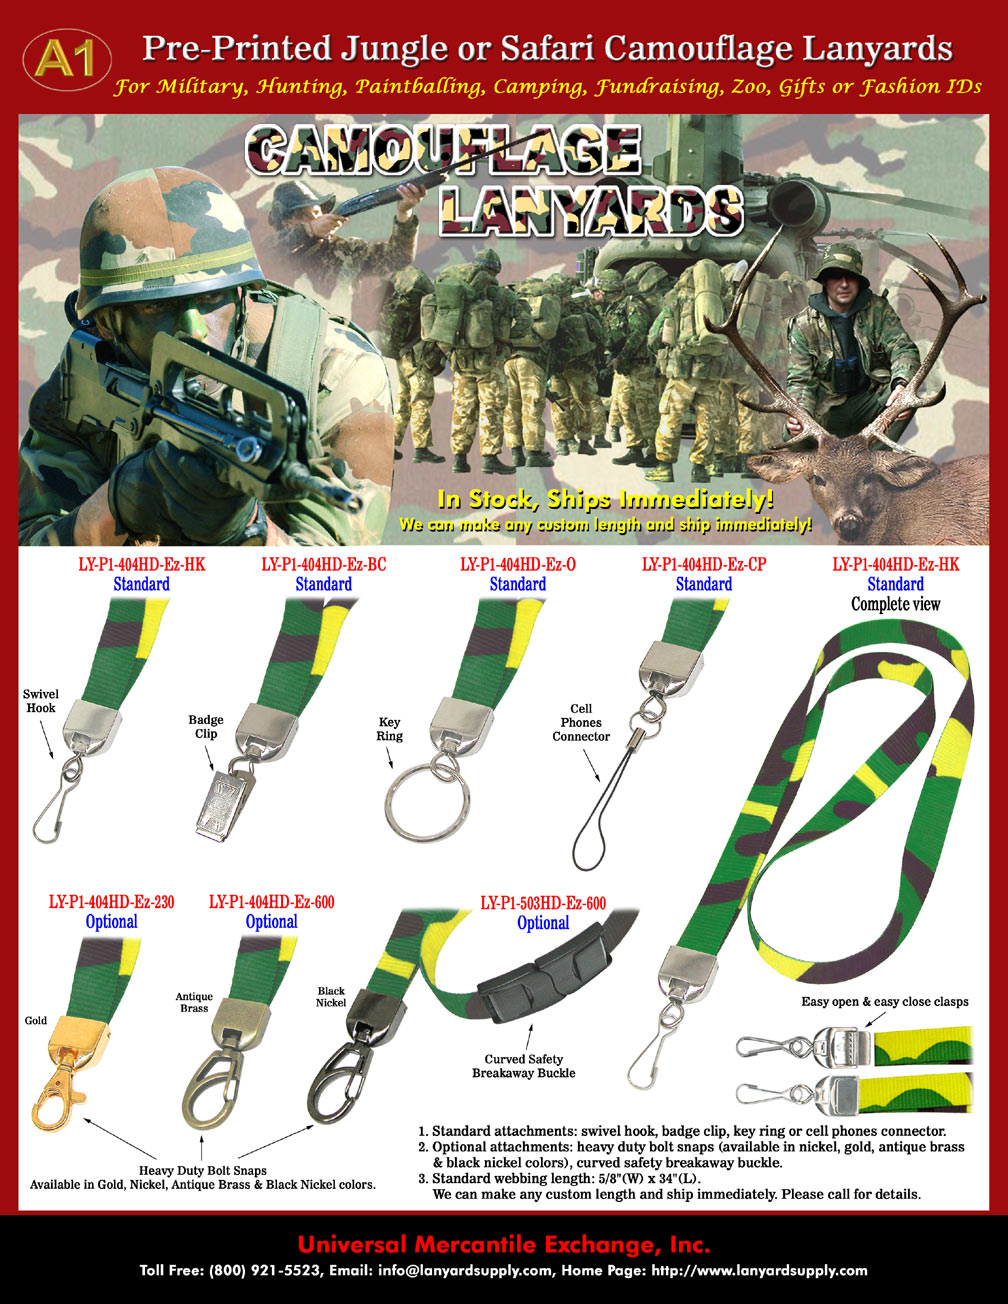 Military lanyards are pre-printed lanyards with concealing colors or concealing color patterns.